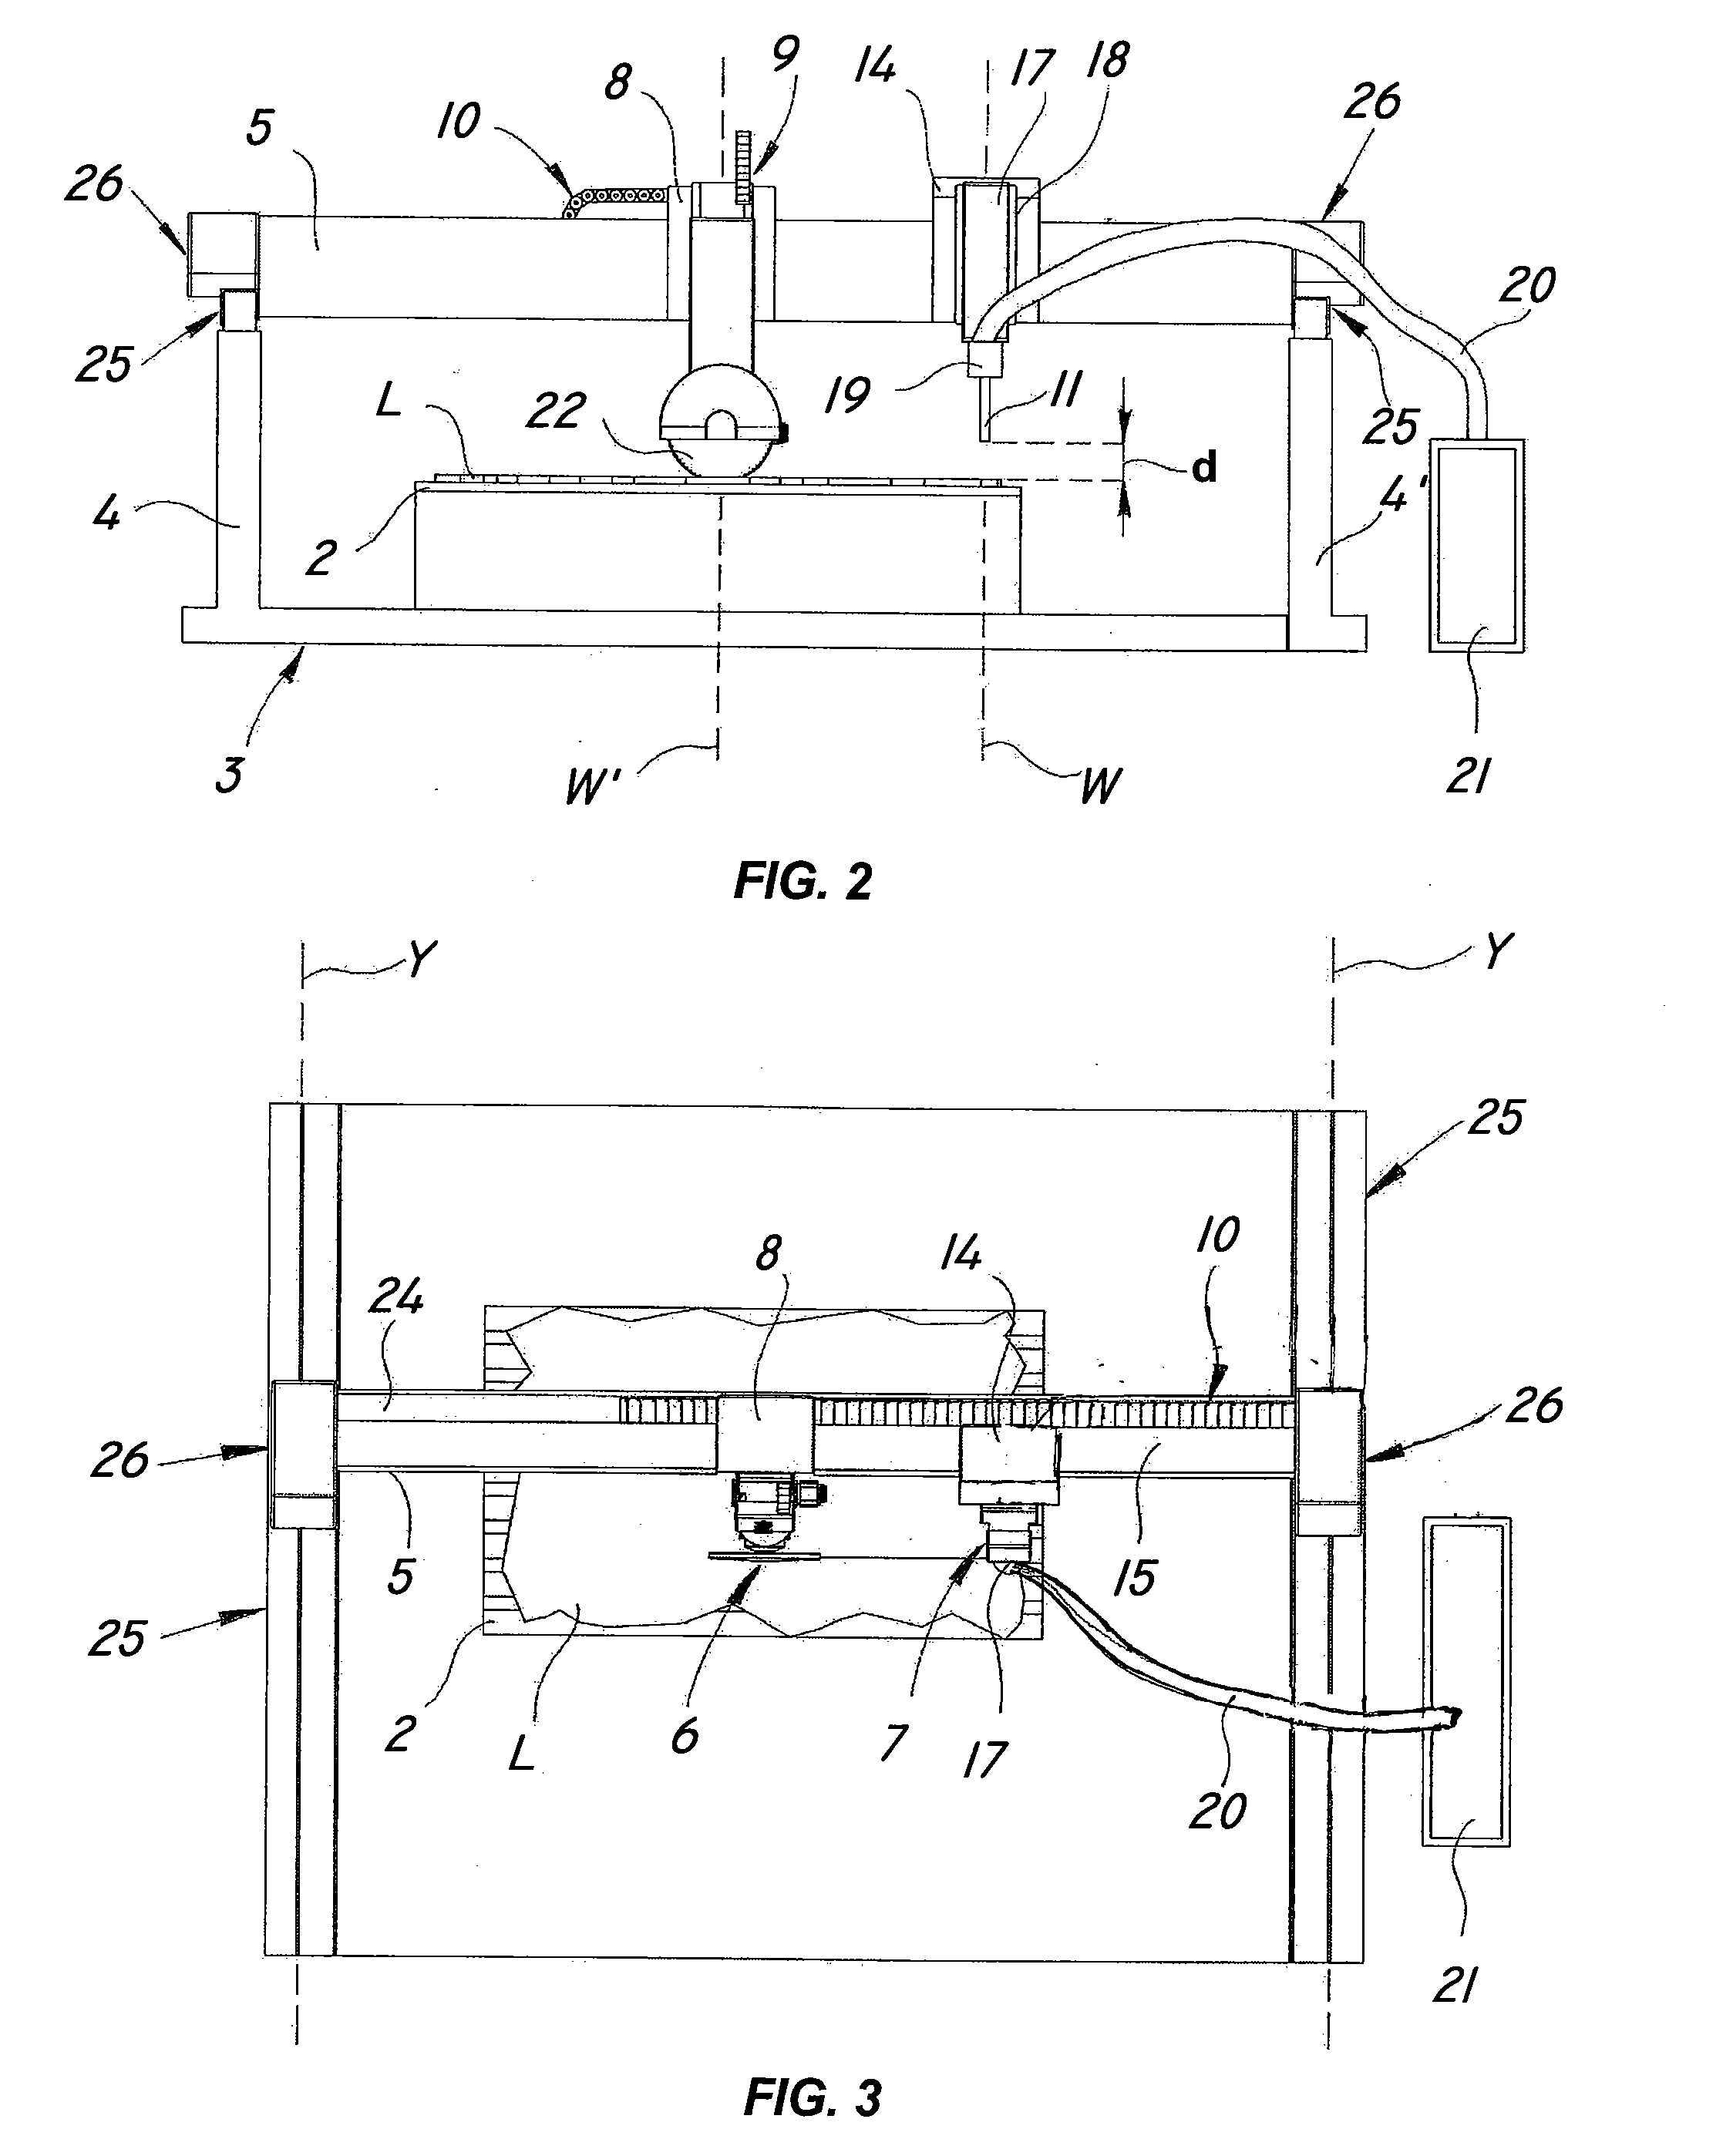 Multiple-tool machine for combined cutting of slabs of hard material